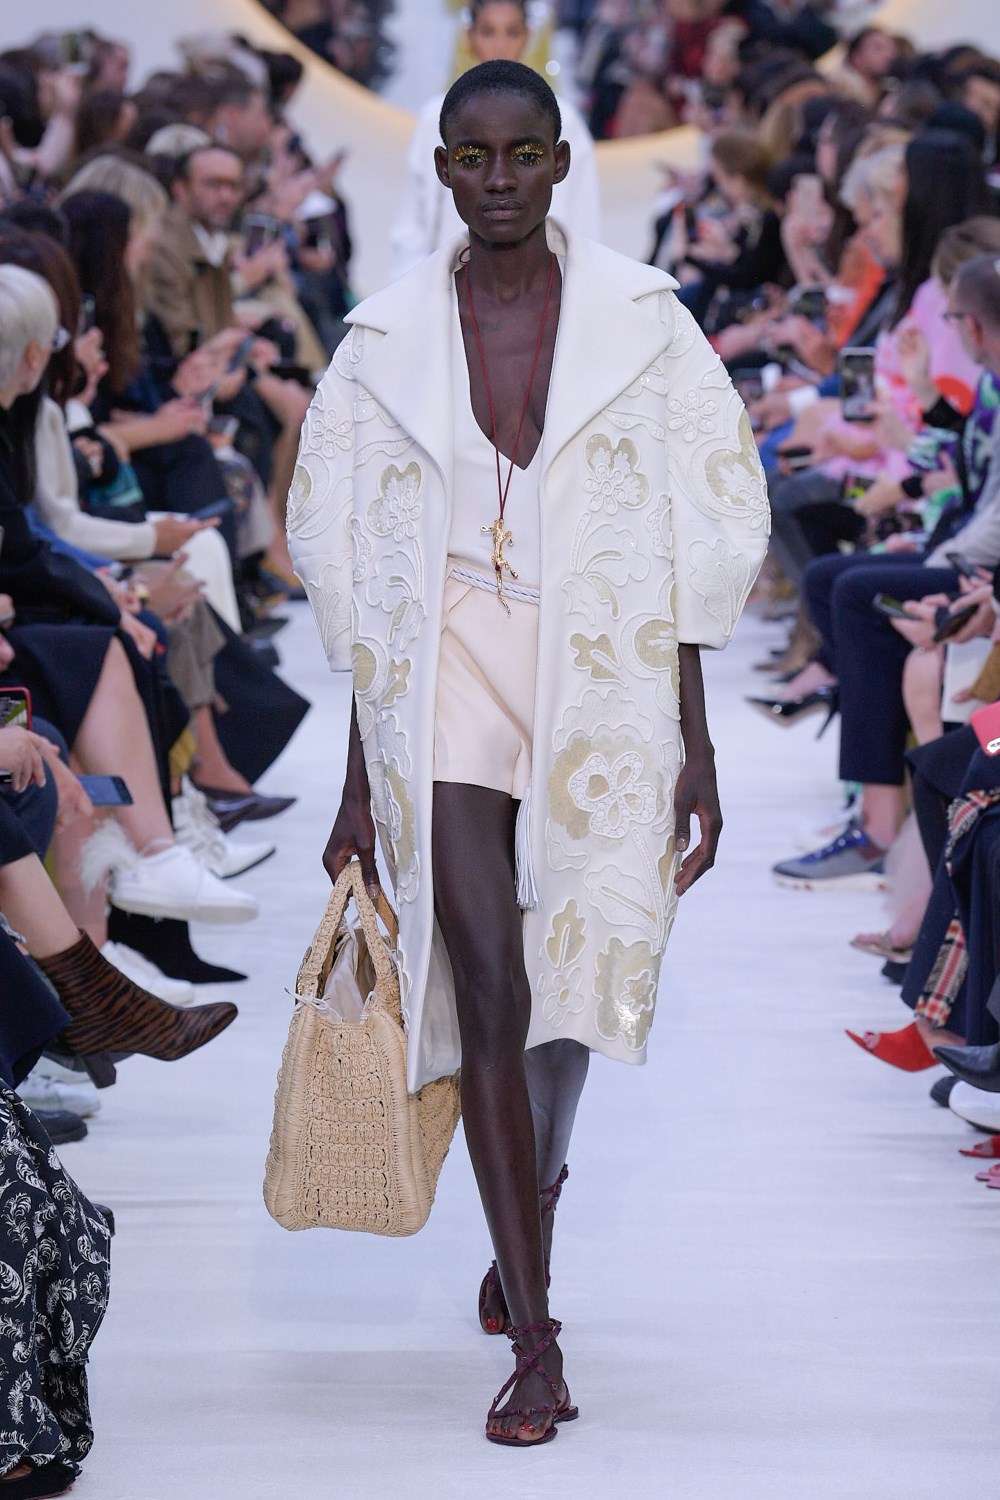 Short Shorts Spring 2020 Trend from Runway to Street | The Impression